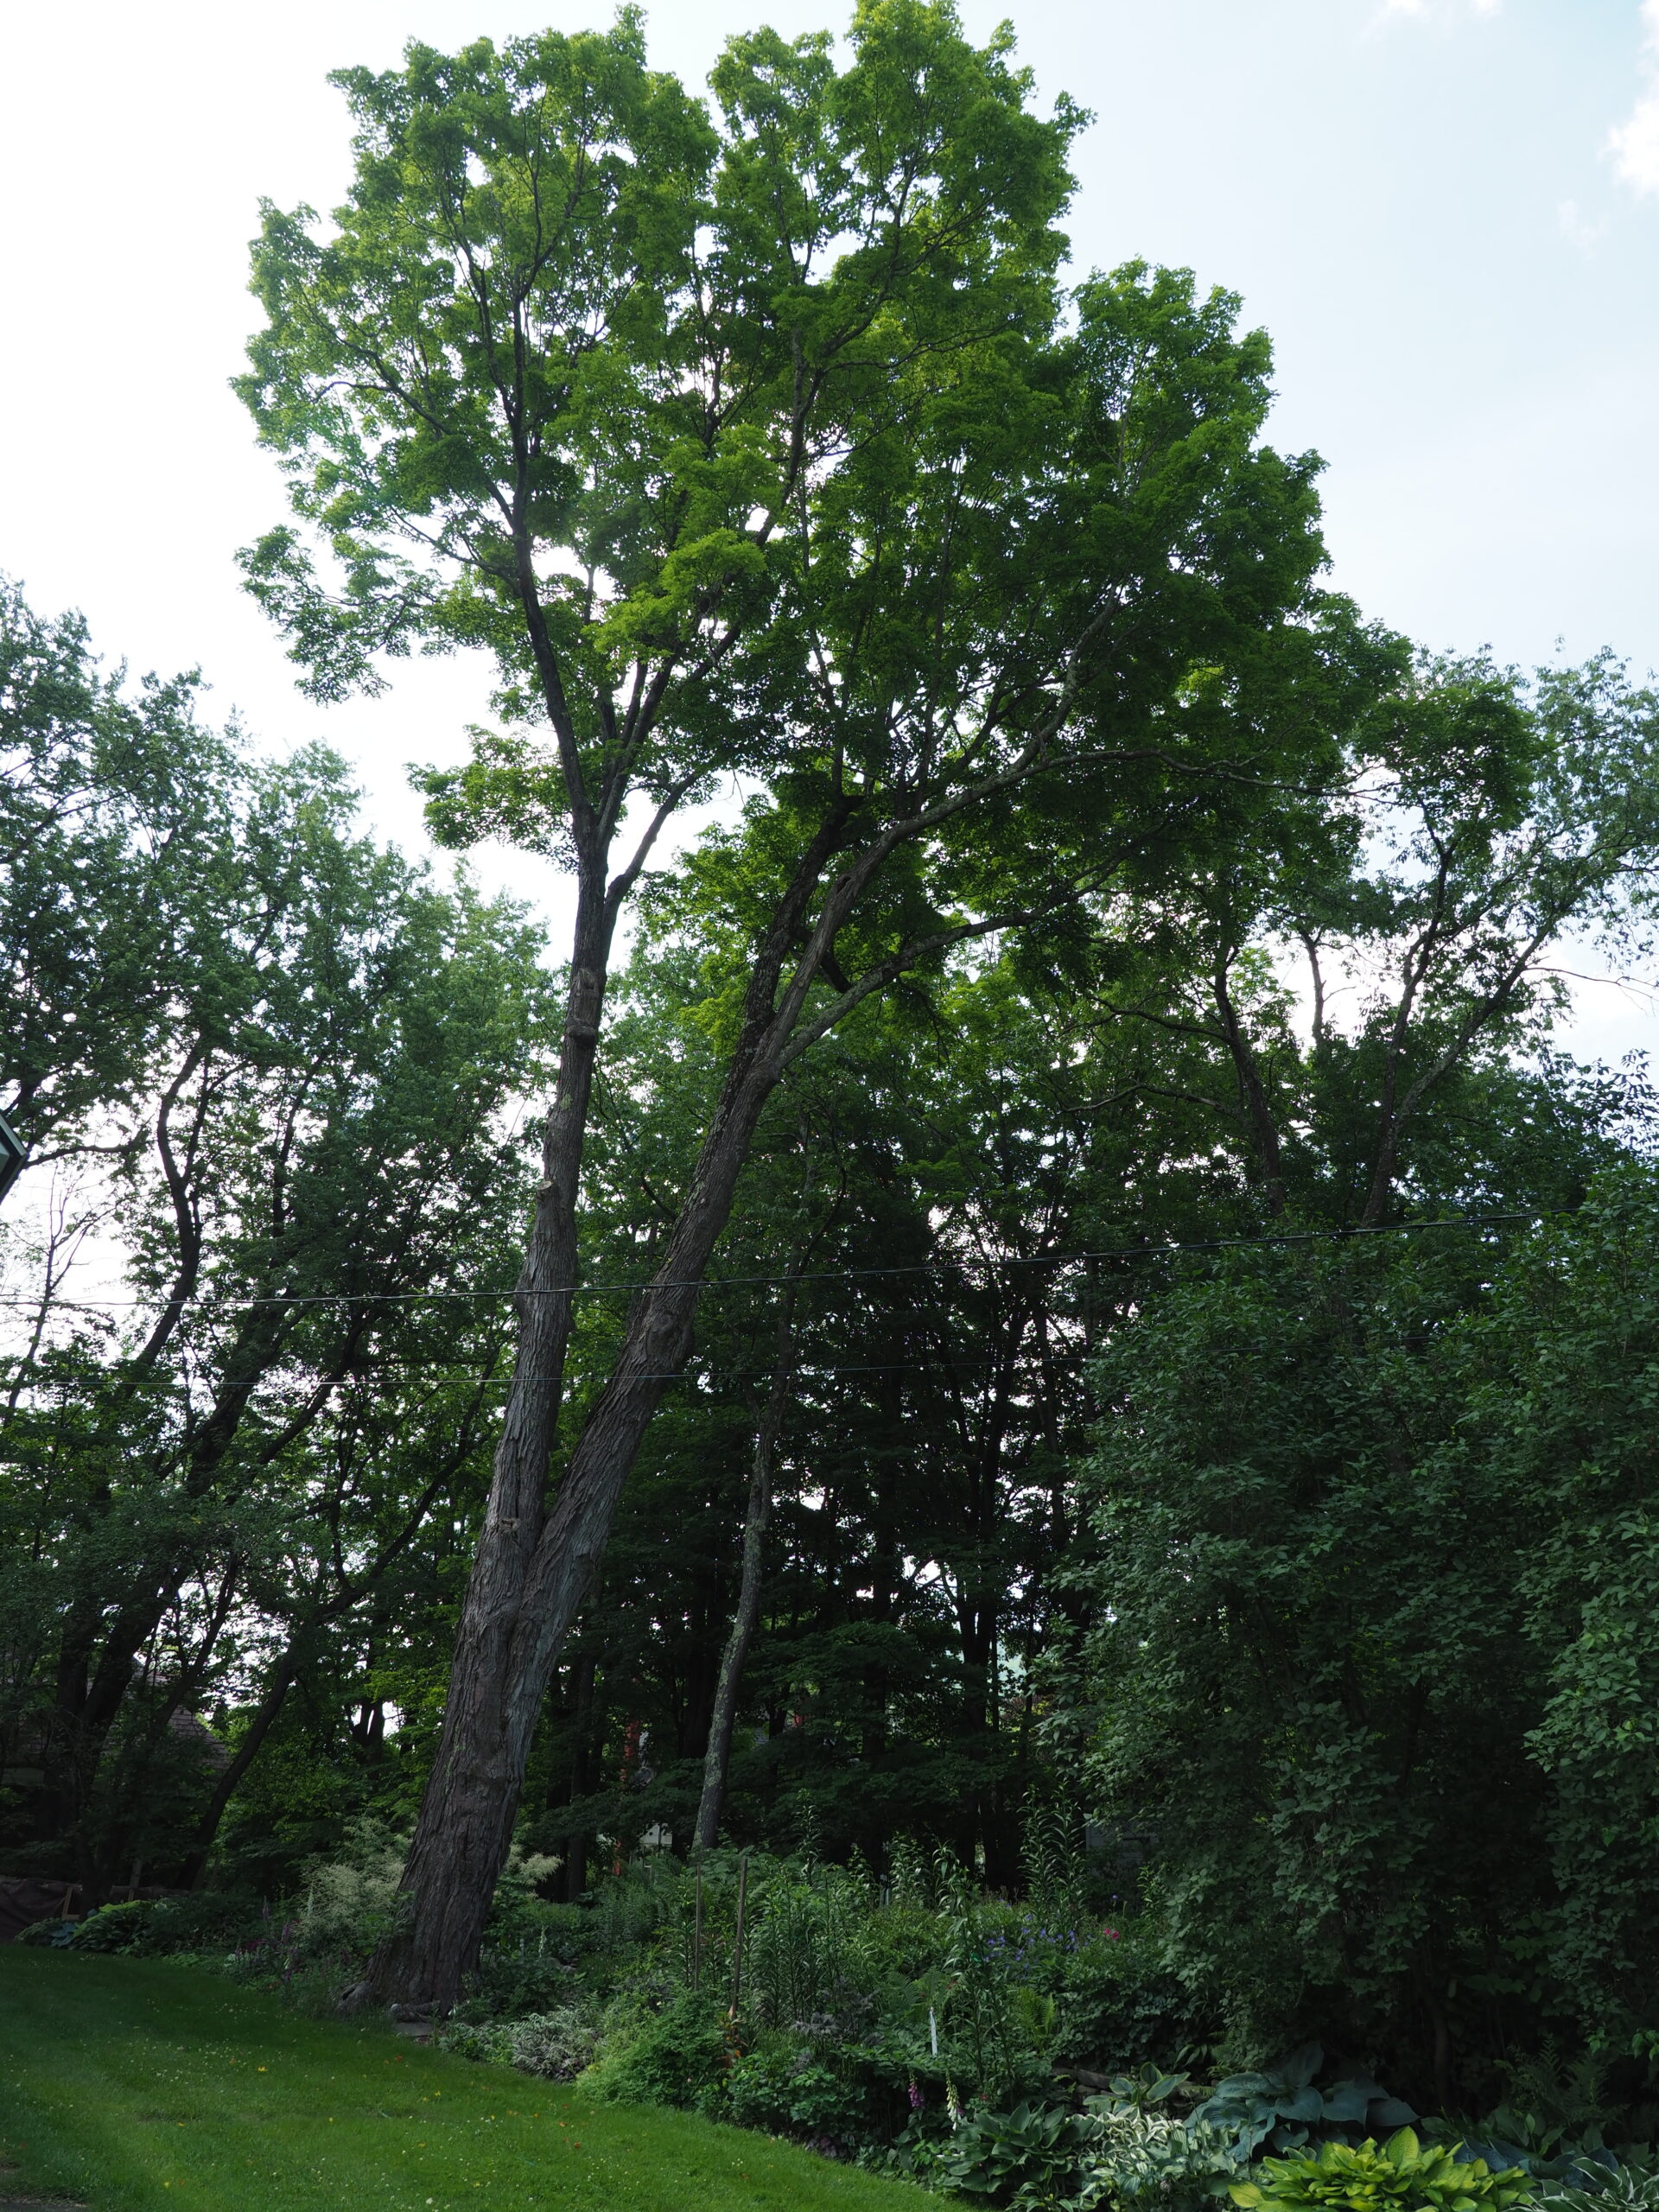 This older maple has been pruned to endure that the canopy won’t catch so much wind to crack the twin trunks.  It’s the high shade from the foliage 100 feet above that enable all the perennials and  lilacs below to thrive.  ANDREW MESSINGER